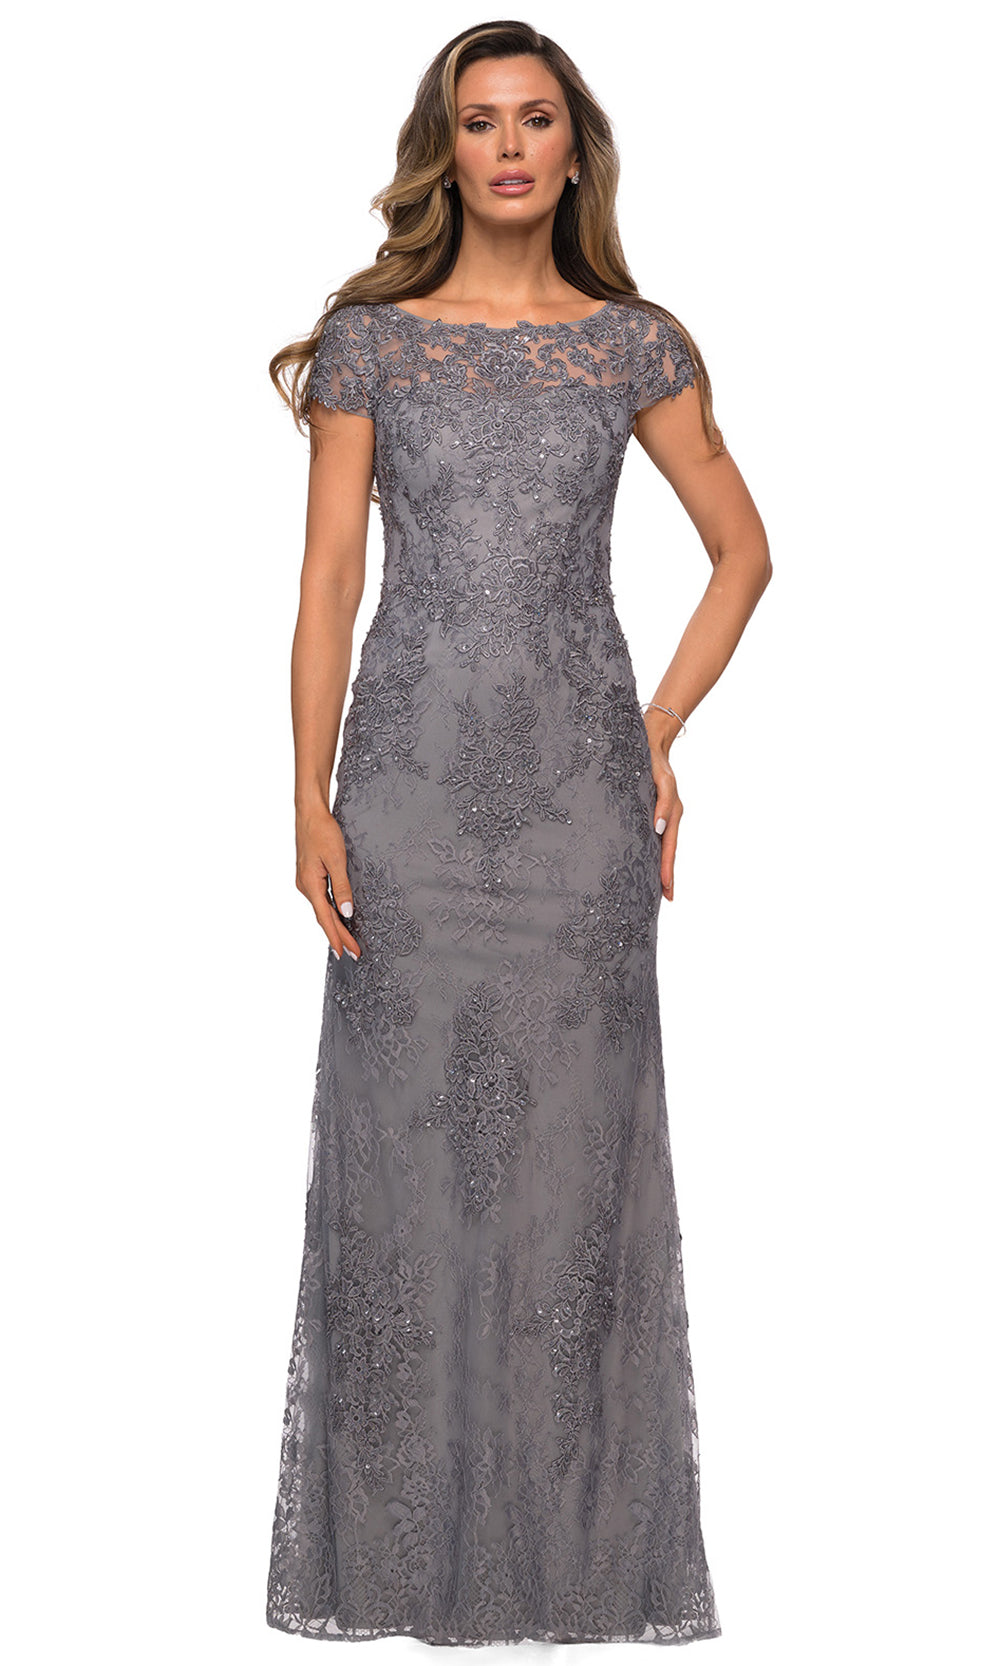 La Femme - 27856 Full Length Lace Fitted Dress In Silver